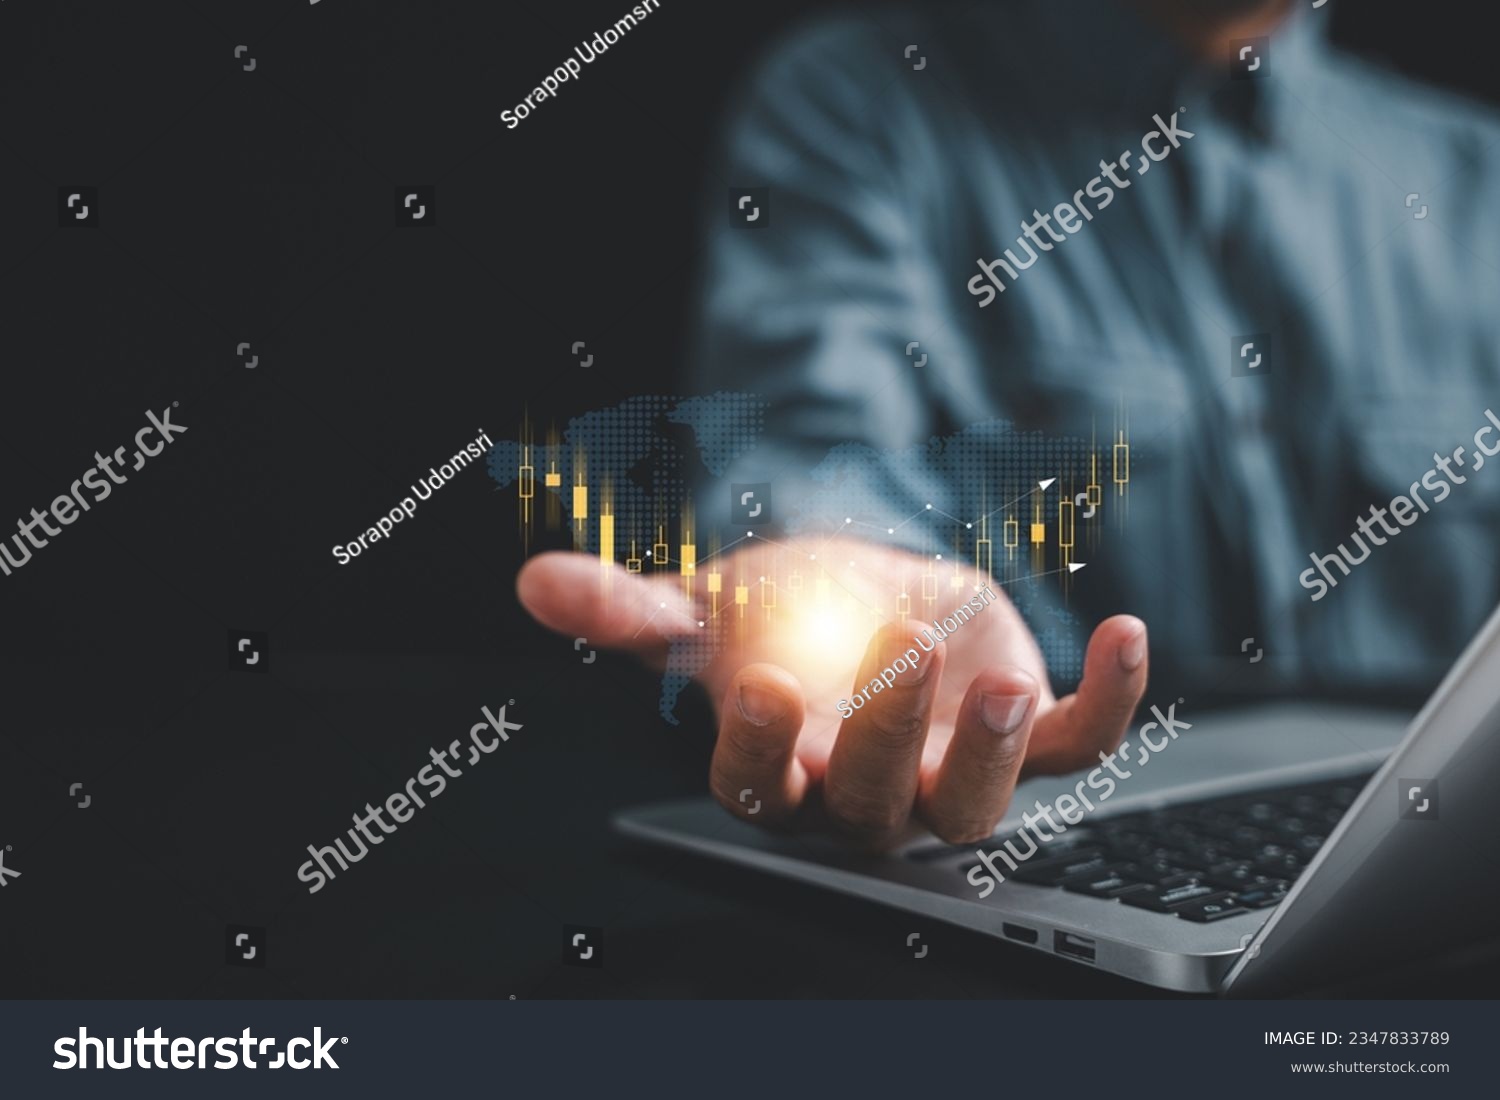 Close-up shot, Investor or trader man demonstrates a hologram of a stock growing chart on his palm. Stock market data analysis, trading strategies, and business growth concepts. Seize the opportunity. #2347833789